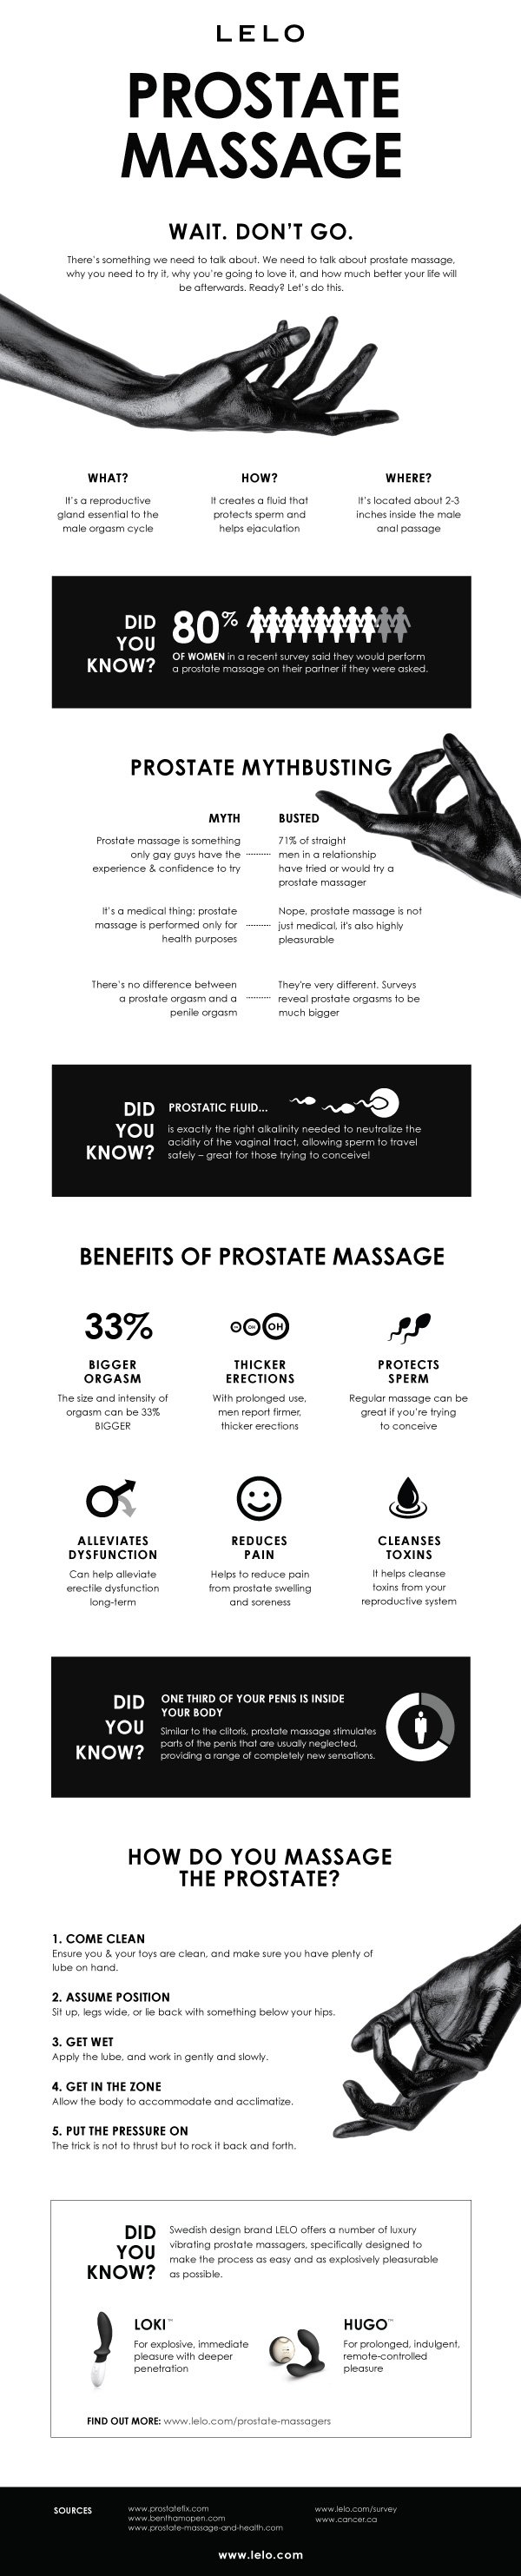 What Is Prostate Massage? What are the Benefits? picture